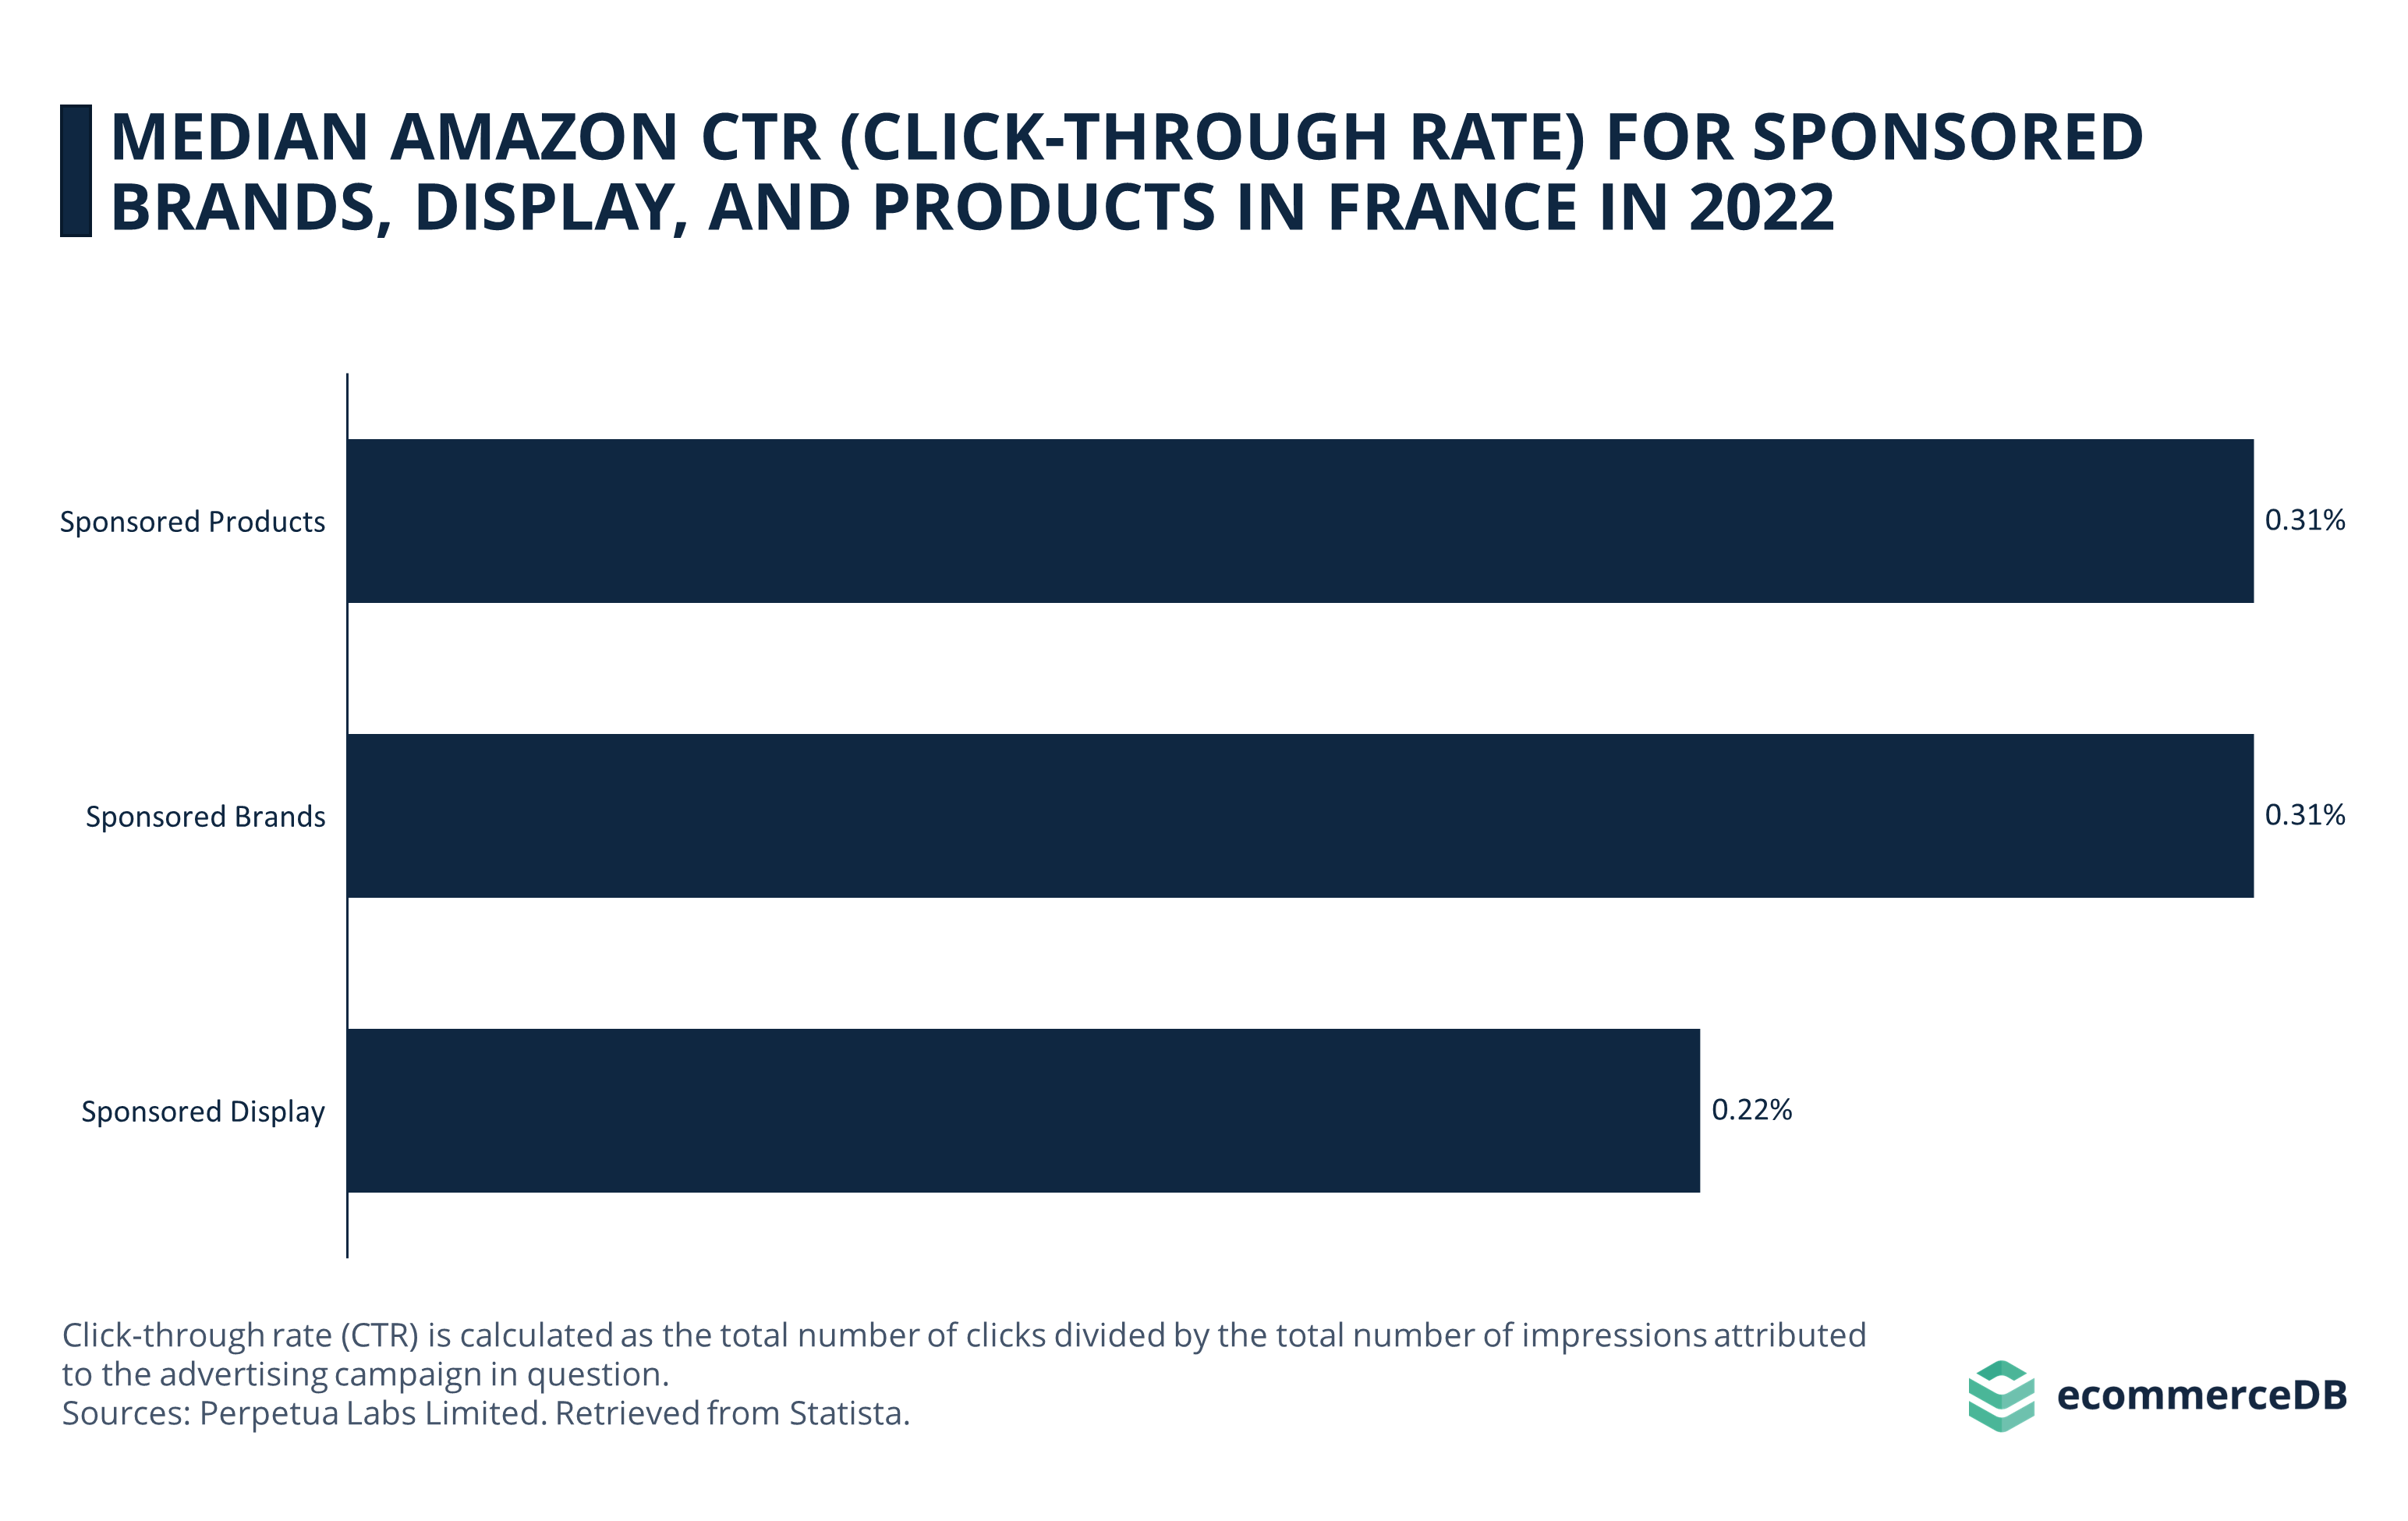 Median Amazon CTR for 3 Ad Types in France